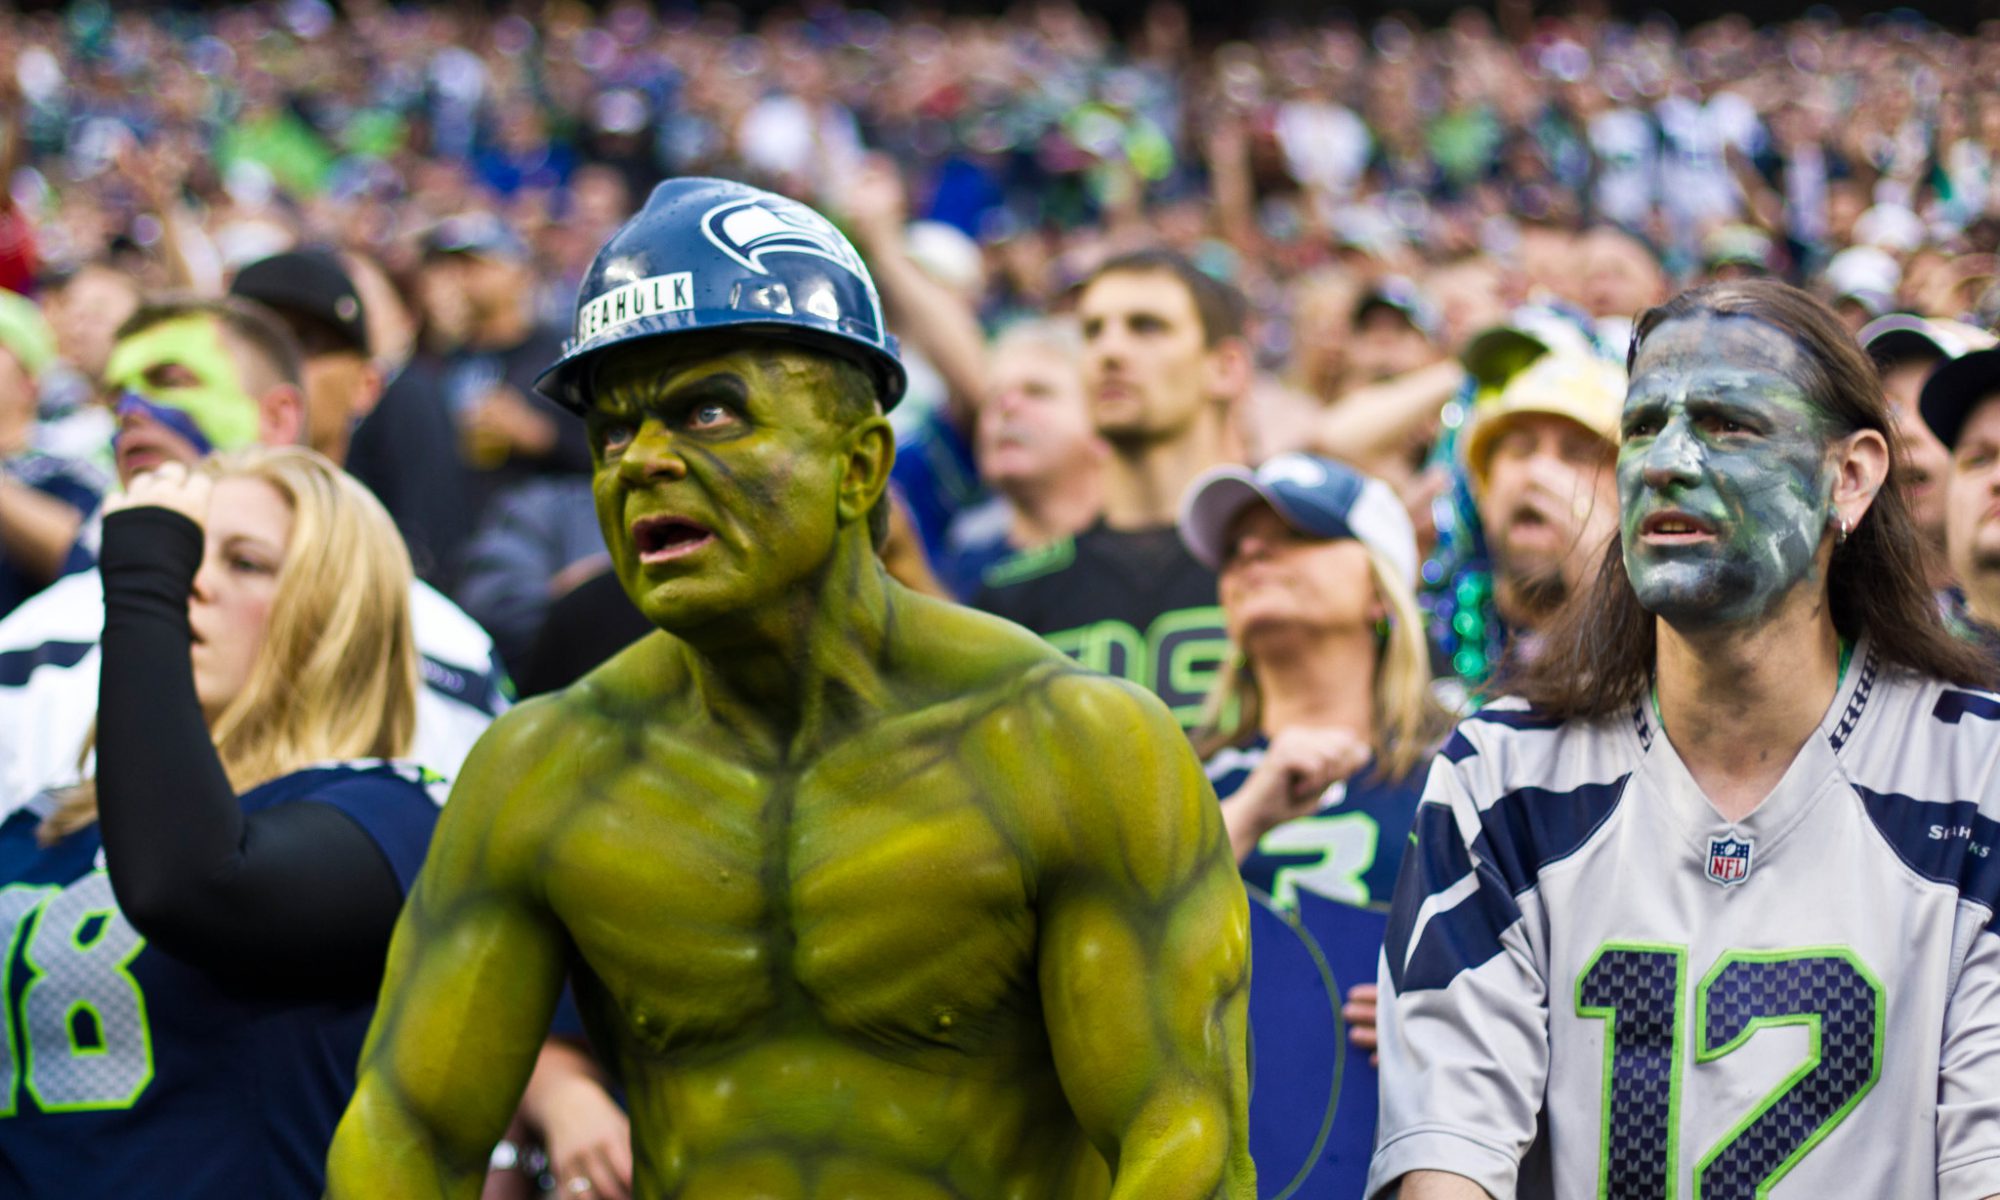 Color photograph of a crowd of football fans, one of whom is dressed up like the Hulk